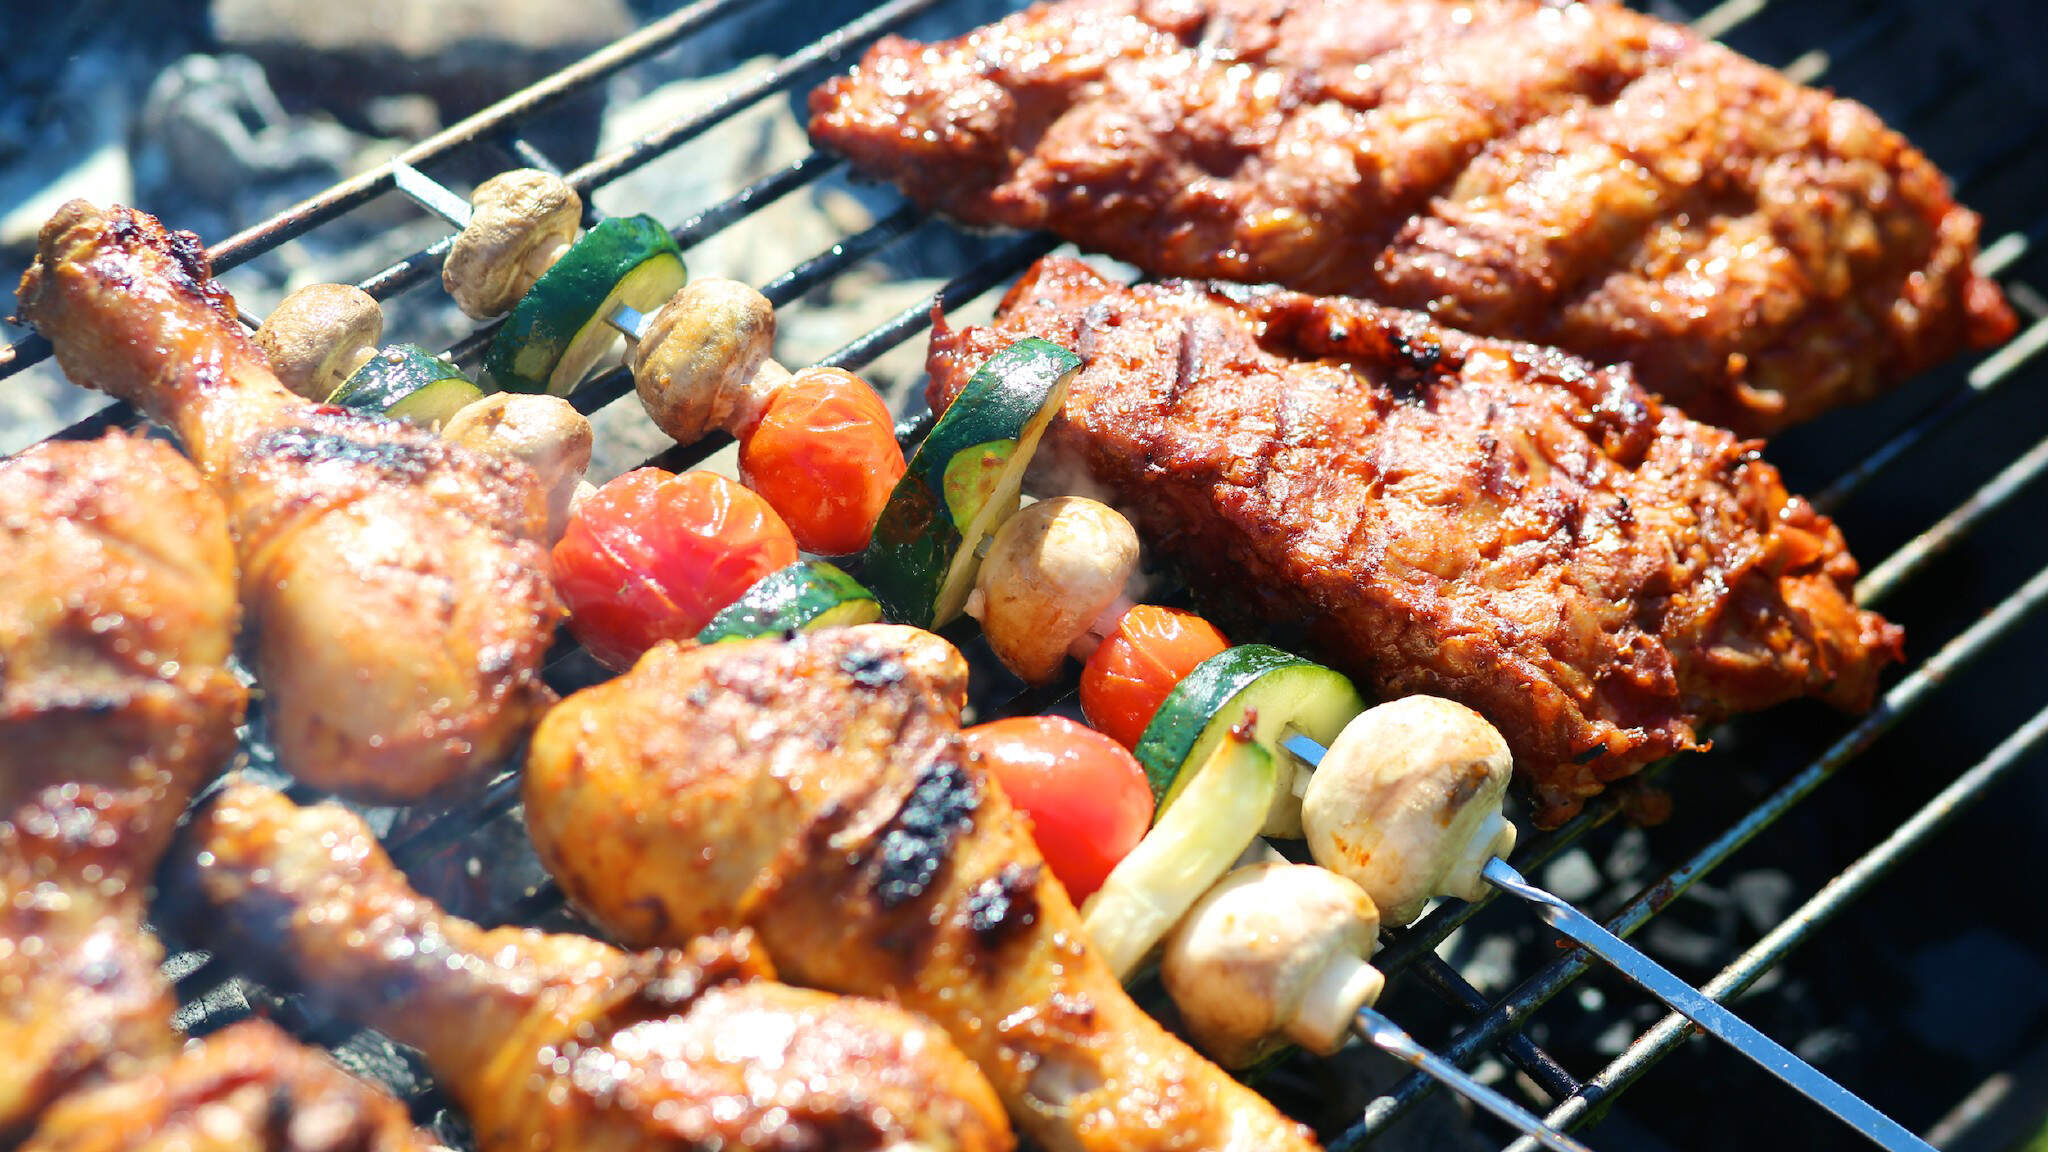 High-quality meat and grilled vegetables are served up more